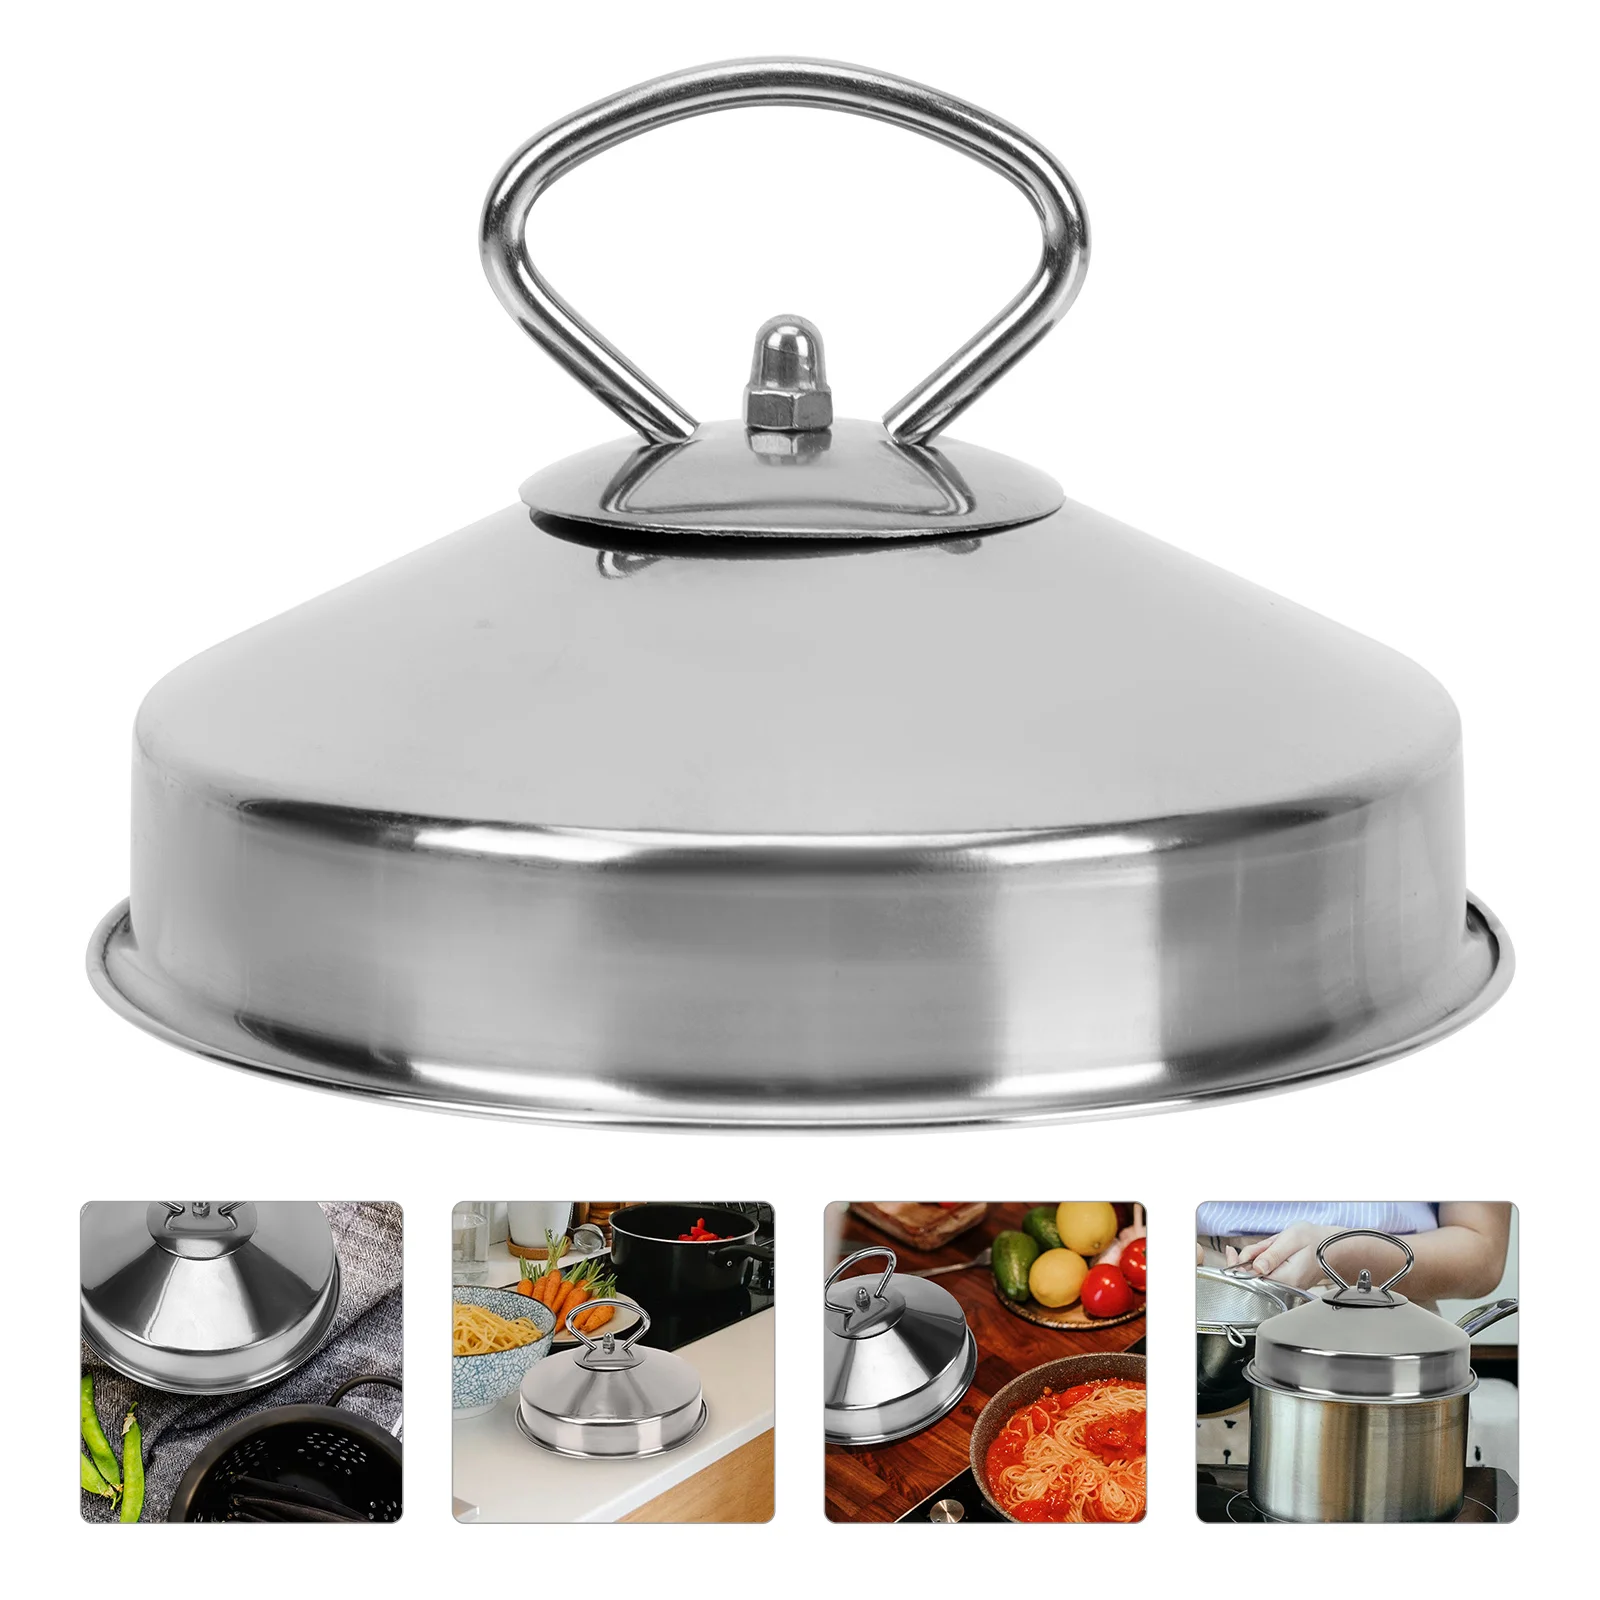 

Cover Dome Lid Pot Pan Basting Steamer Cooking Metal Melting Steaming Lids Wok Replacement Iron Skillet Steam Splatter Cheese